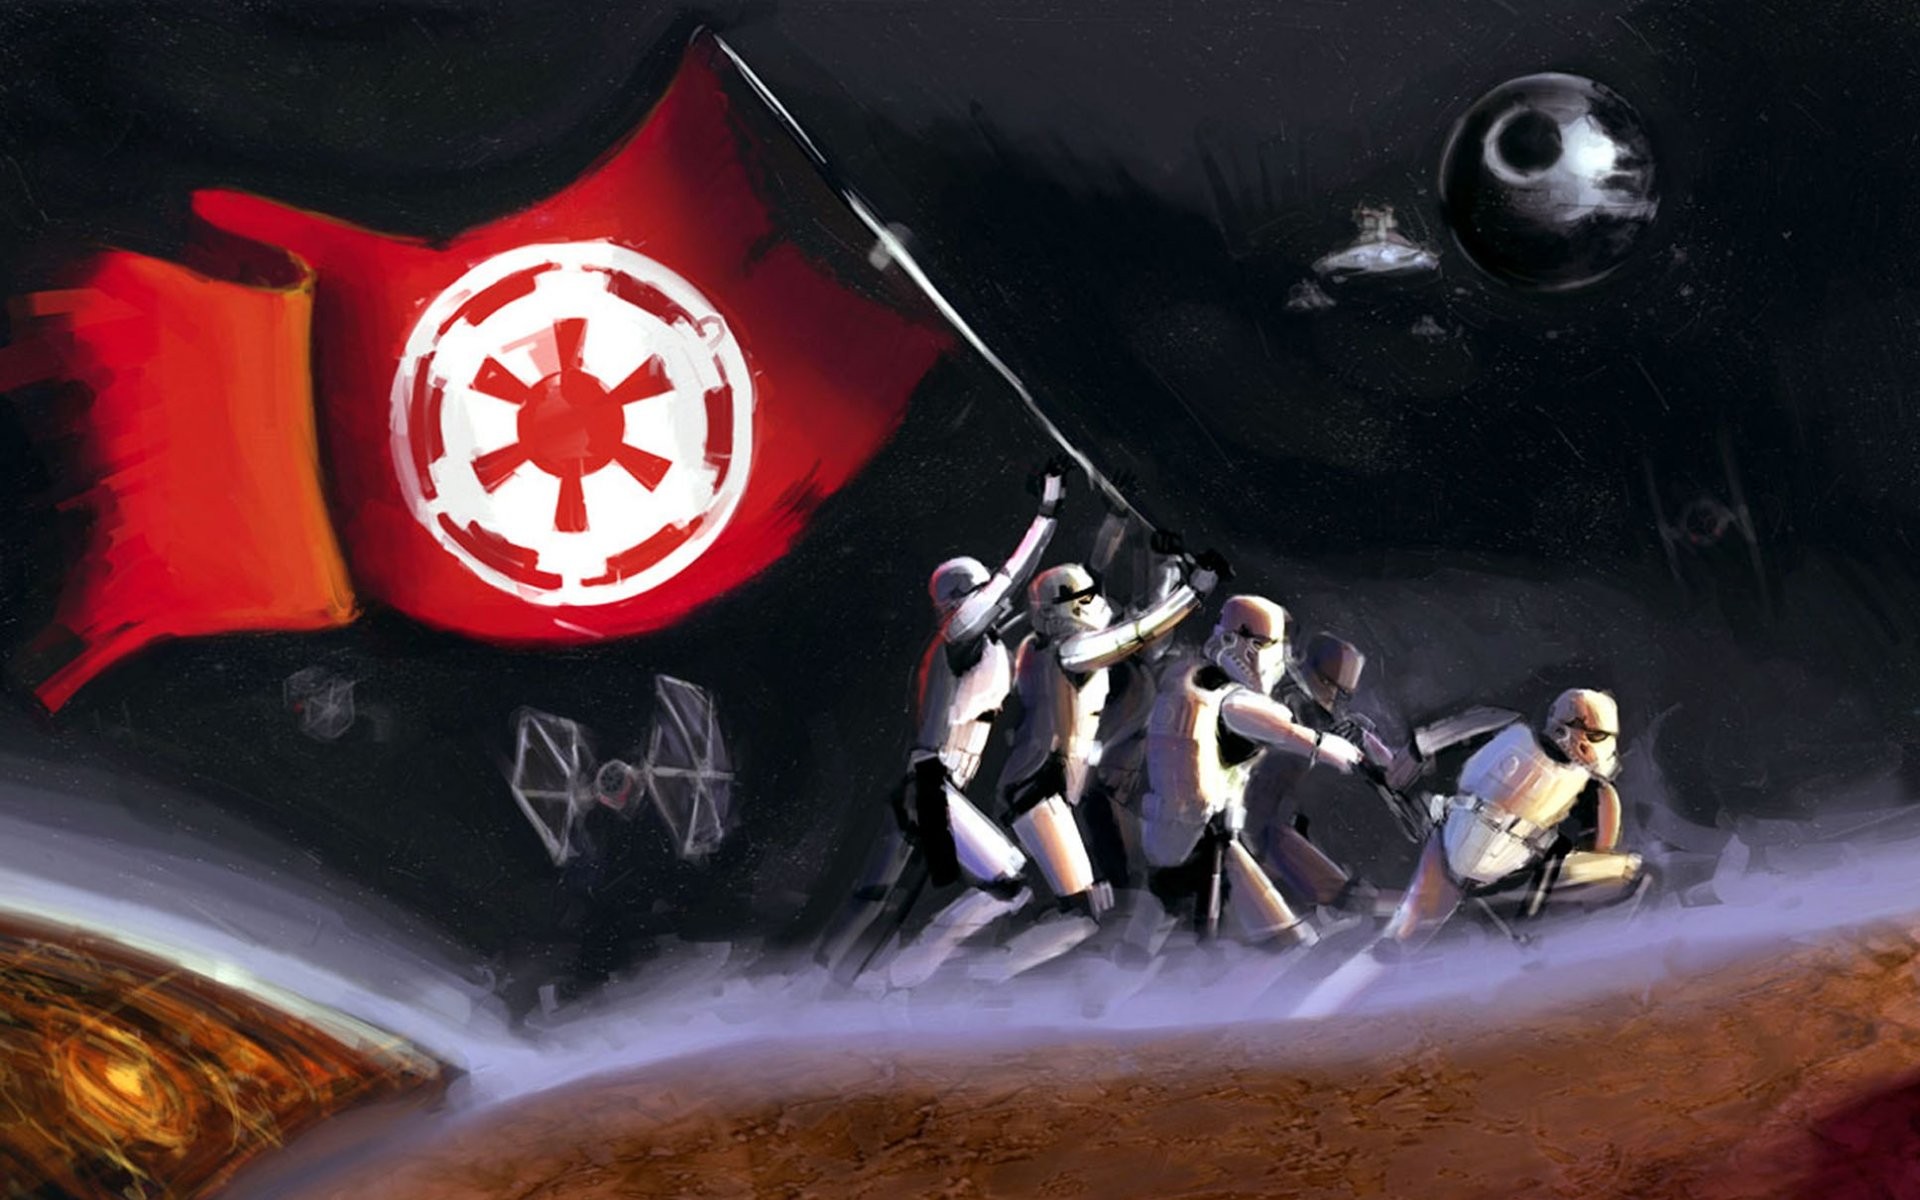 General 1920x1200 Star Wars stormtrooper flag Death Star artwork Imperial Stormtrooper Imperial Forces science fiction